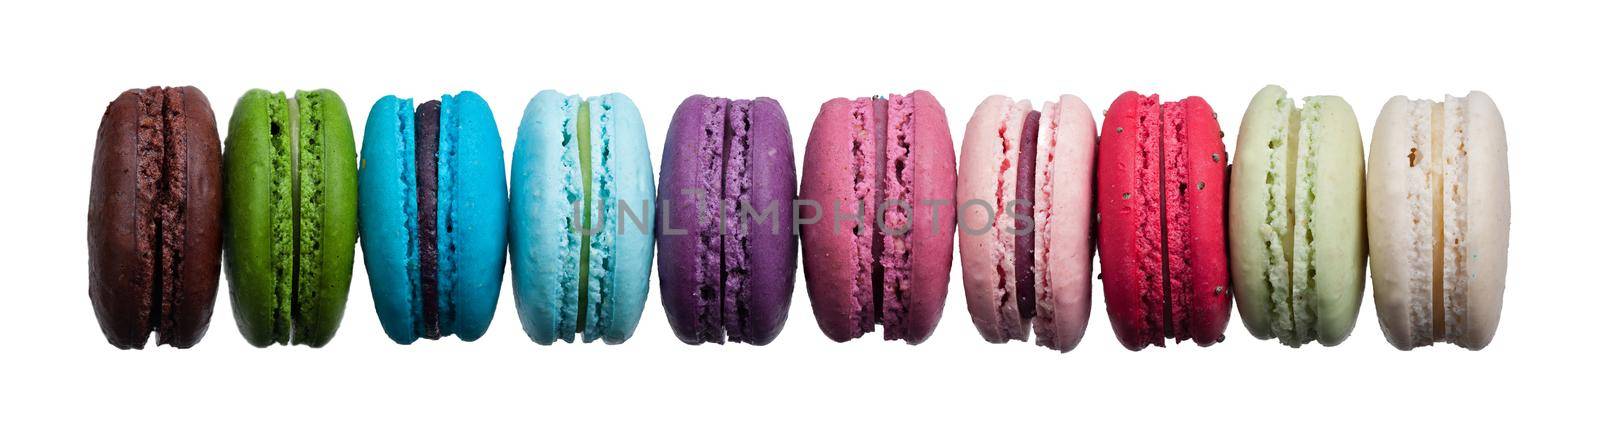 Colored macaroon on white background. High definition photo in close up